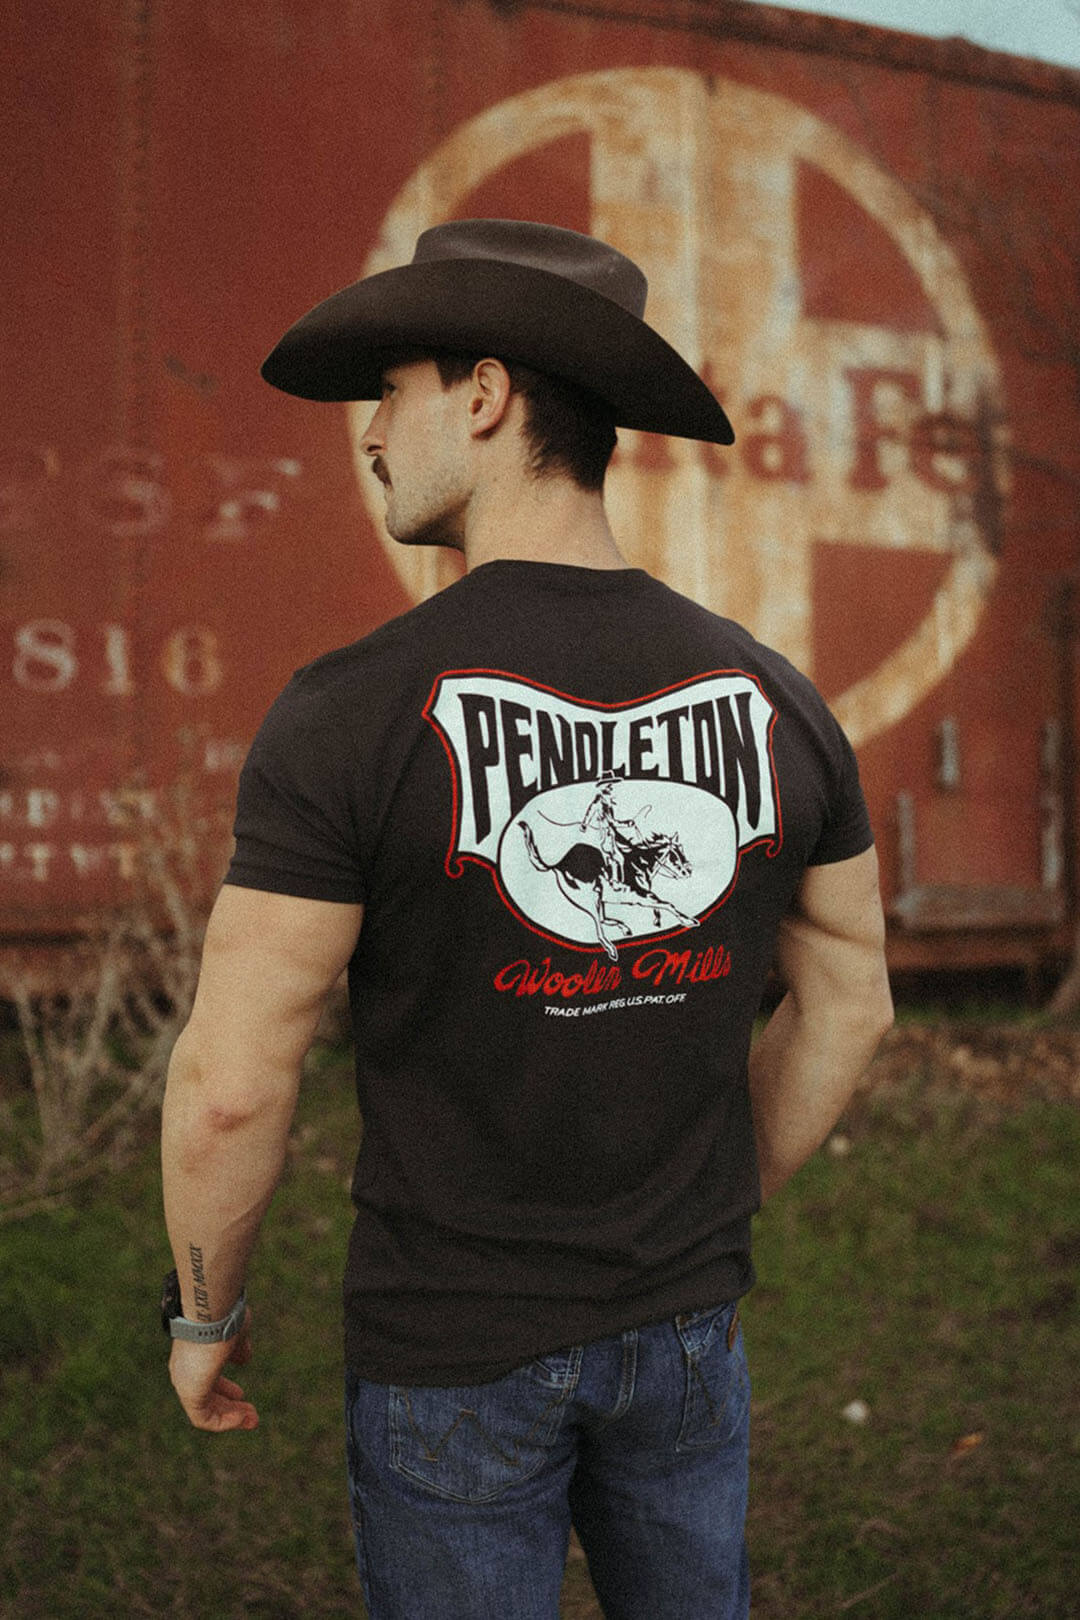 Man modeling the back side of the pendleton rodeo rider graphic tee featuring a picture of a cowboy on horse with the words "Pendleton" across back.  